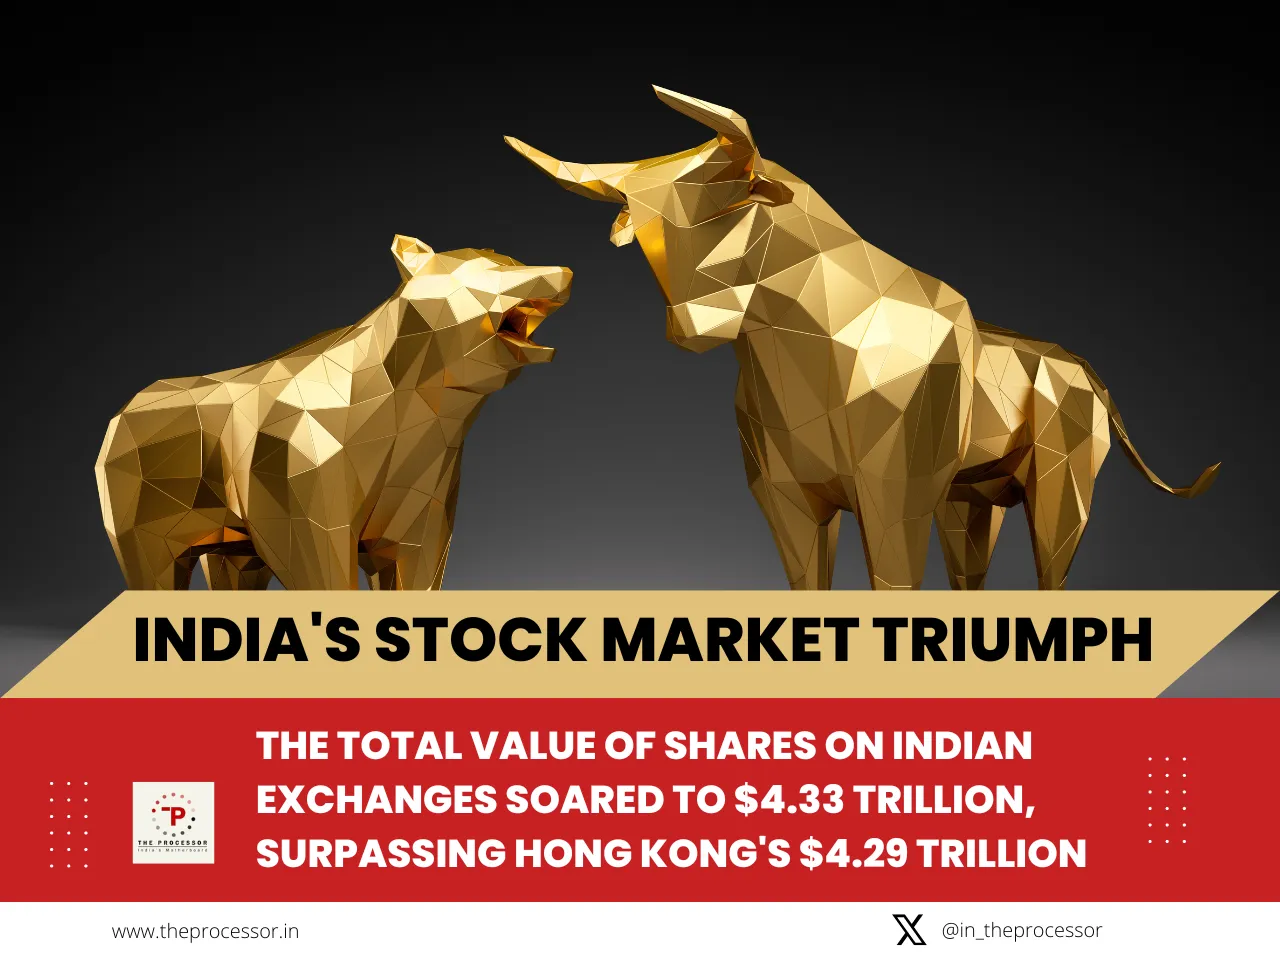 India's Stock Market Triumph and the Symphony of Economic Resilience